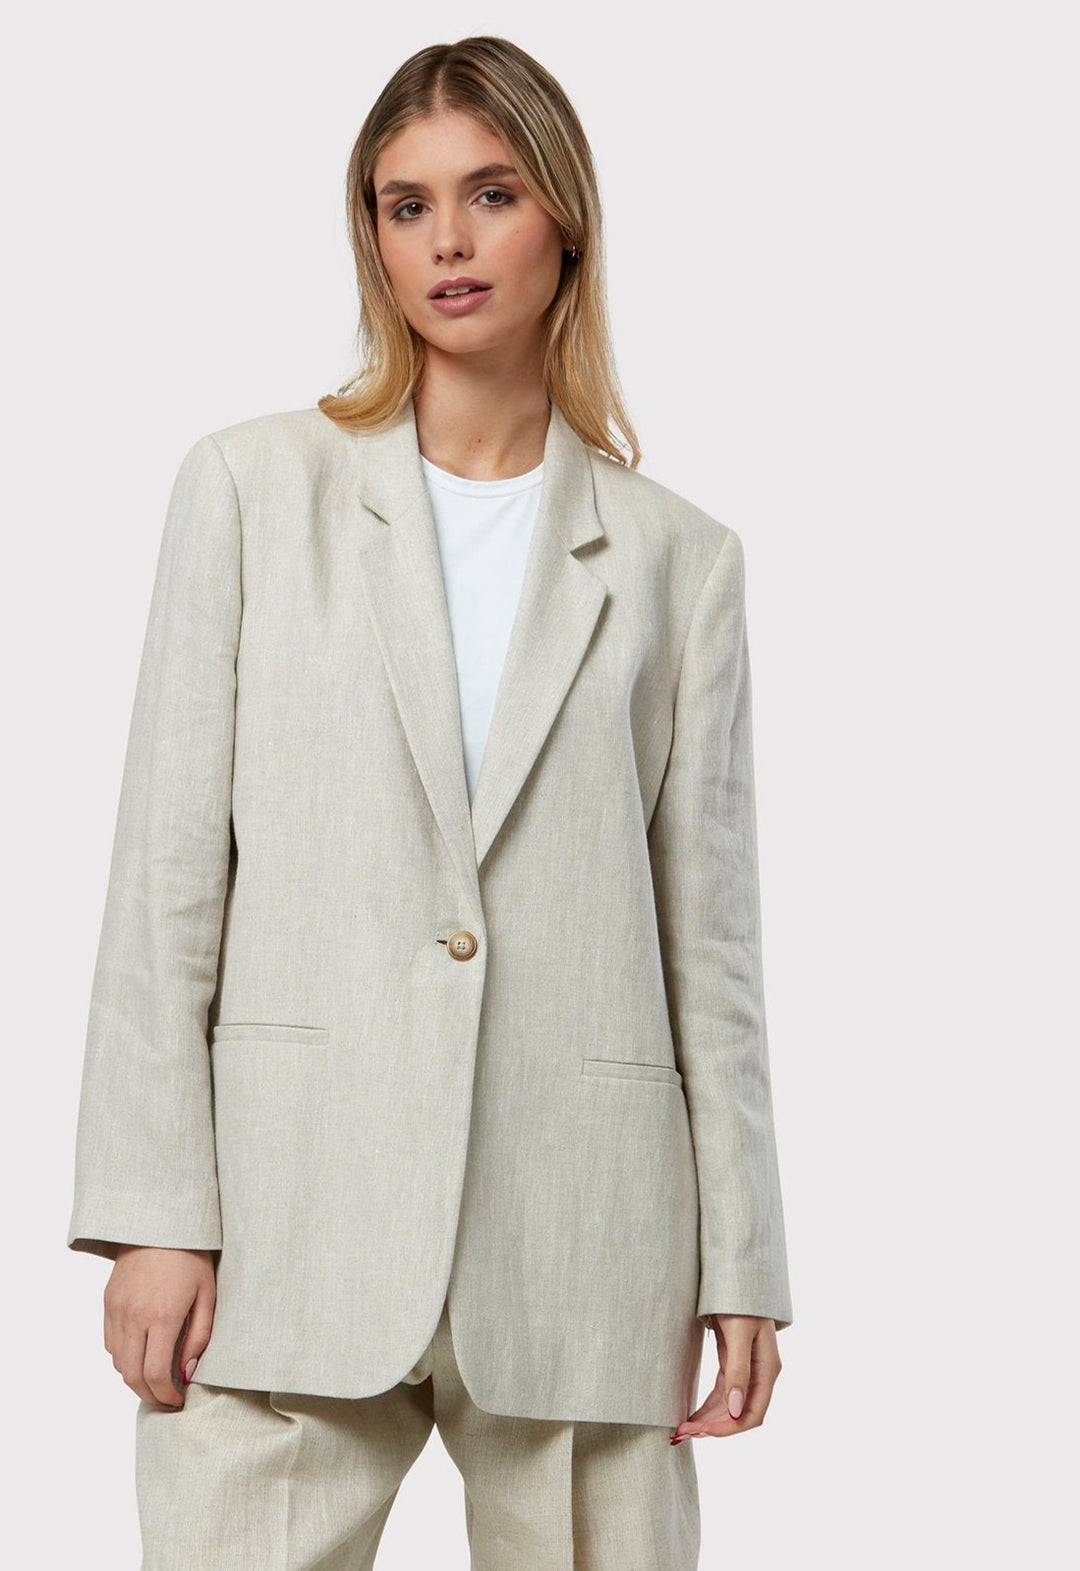 Cassie, the investment-worthy oatmeal linen blazer. A perfect blend of summer elegance and versatility. Featuring minimalist styling with a single button fastening and an oversized, slightly boxy silhouette, it offers effortless sophistication. Pair with a simple tee and the coordinating Vanessa pant, complemented by trainers for a chic and contemporary look.